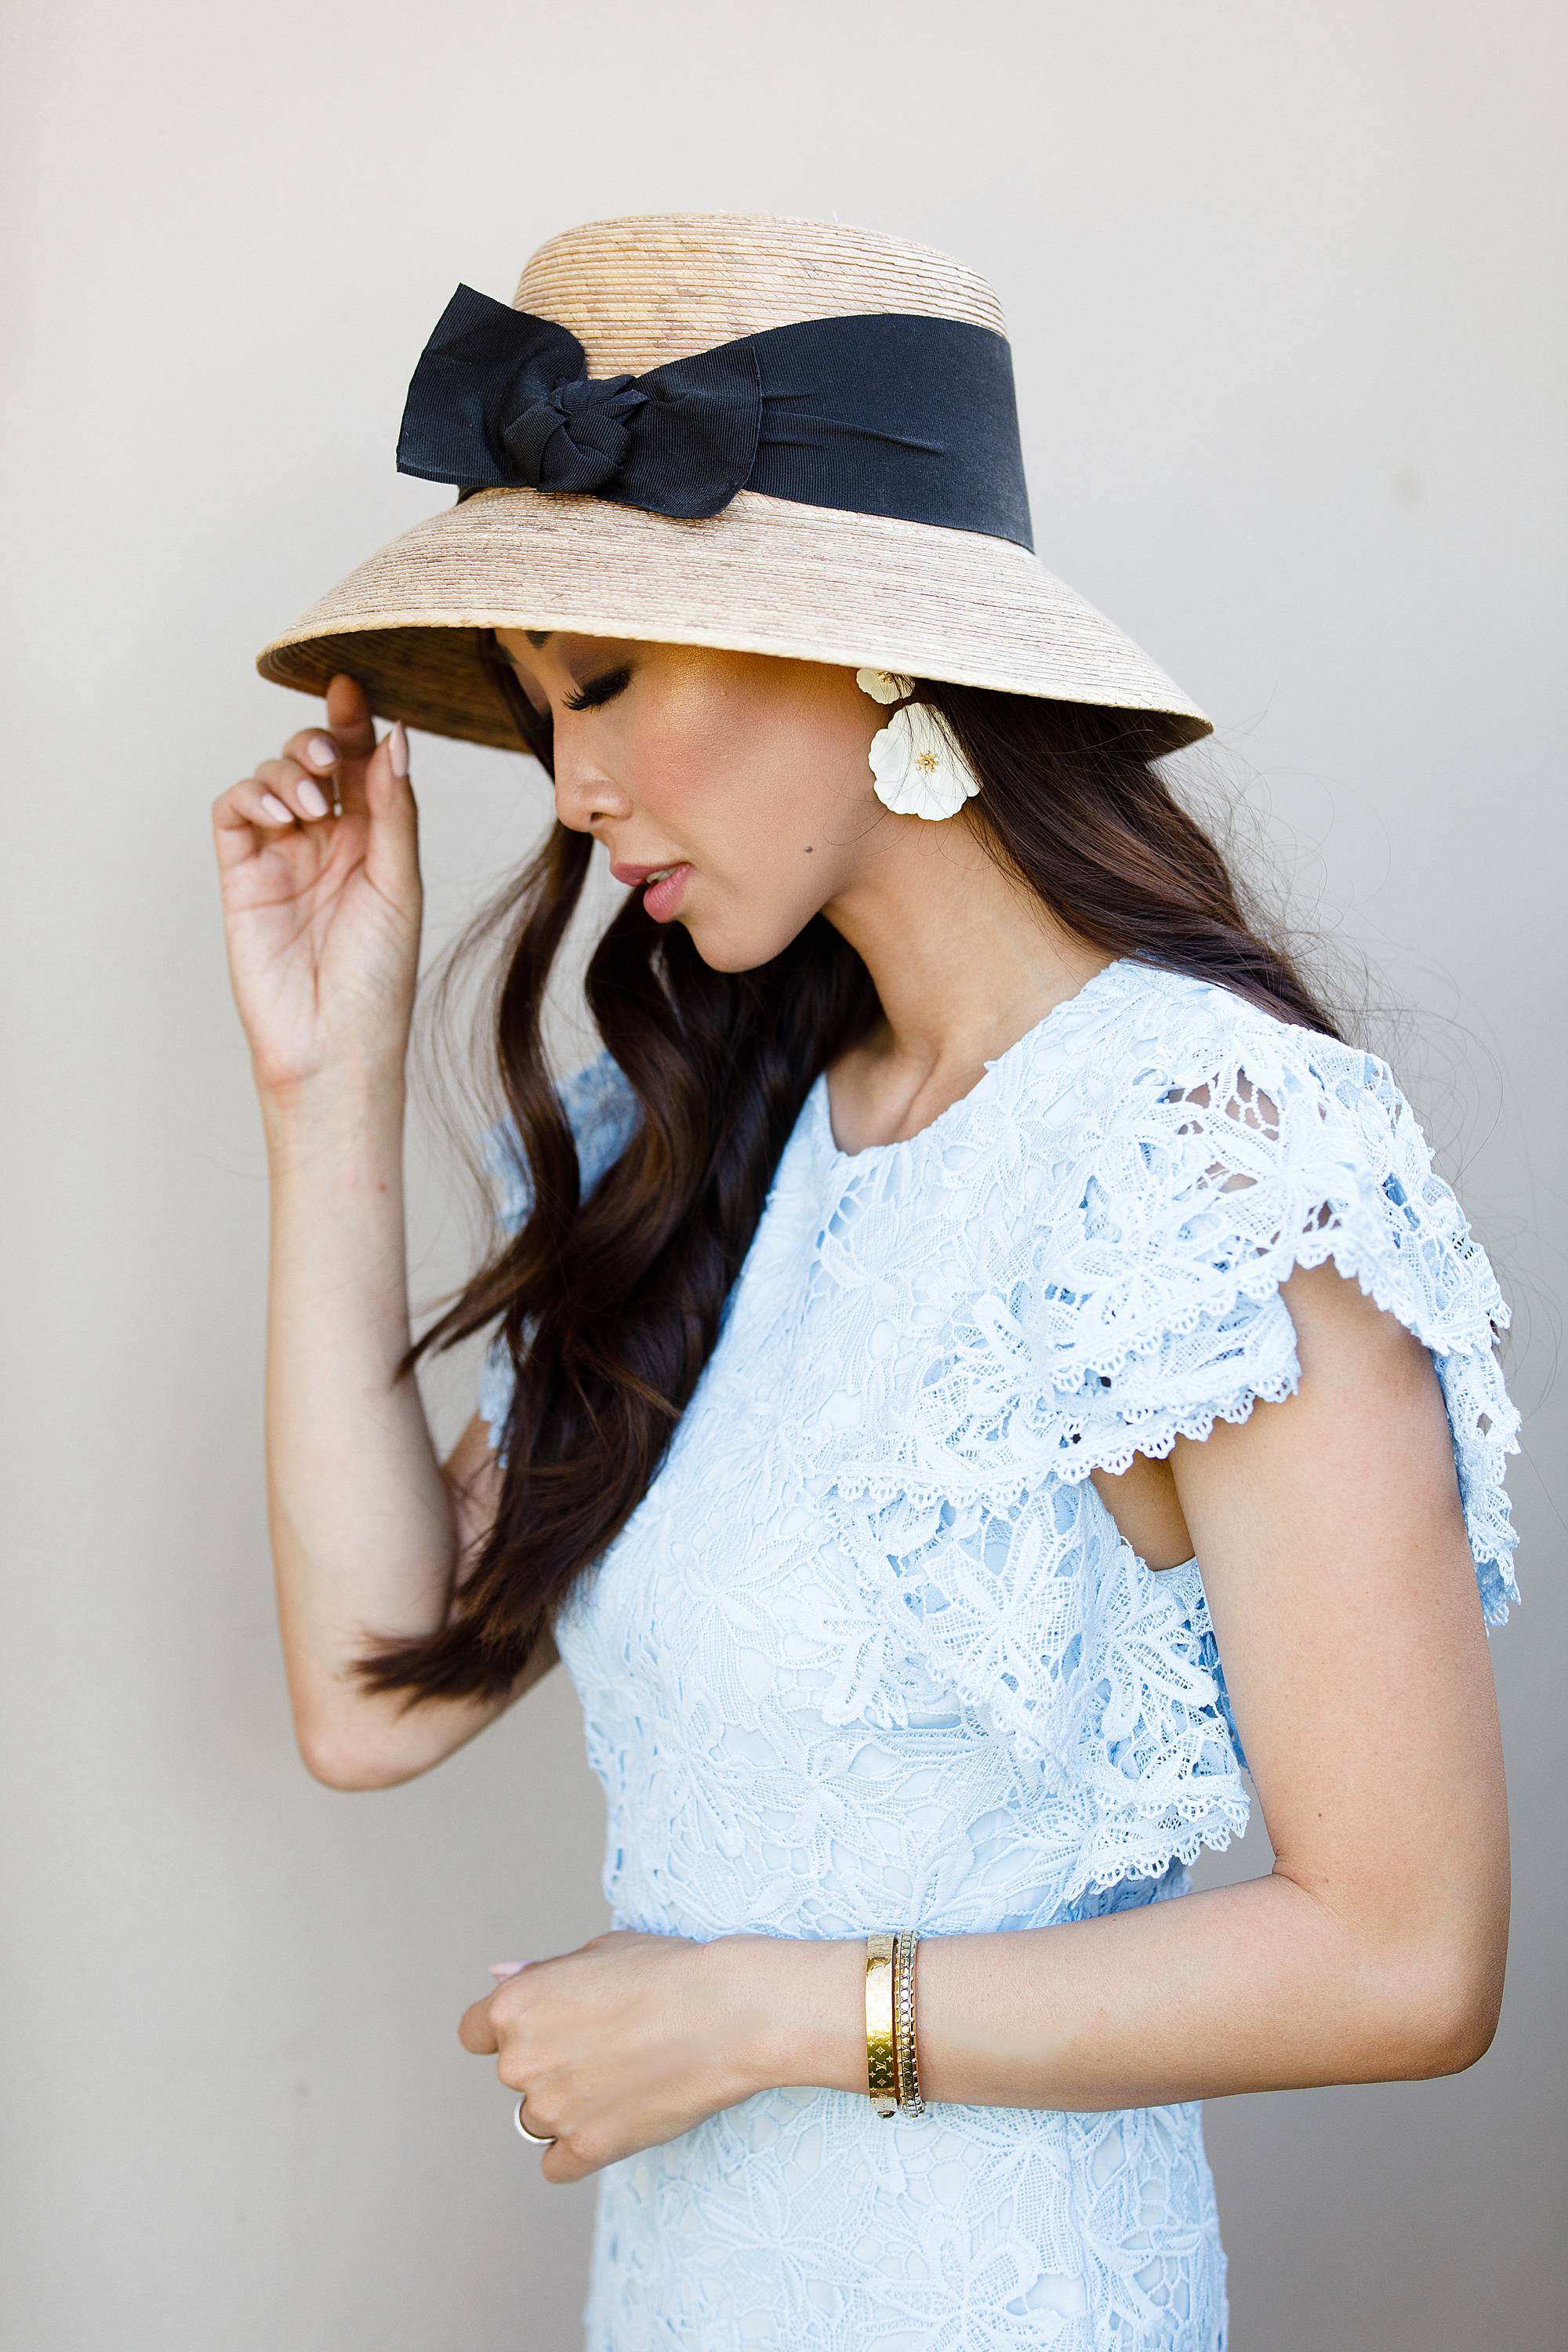 blue lace dress with garden hat from terrain nestled between pink roses against the wall - lifestyle blogger Diana Elizabeth phoenix scottsdale arizona holding rose